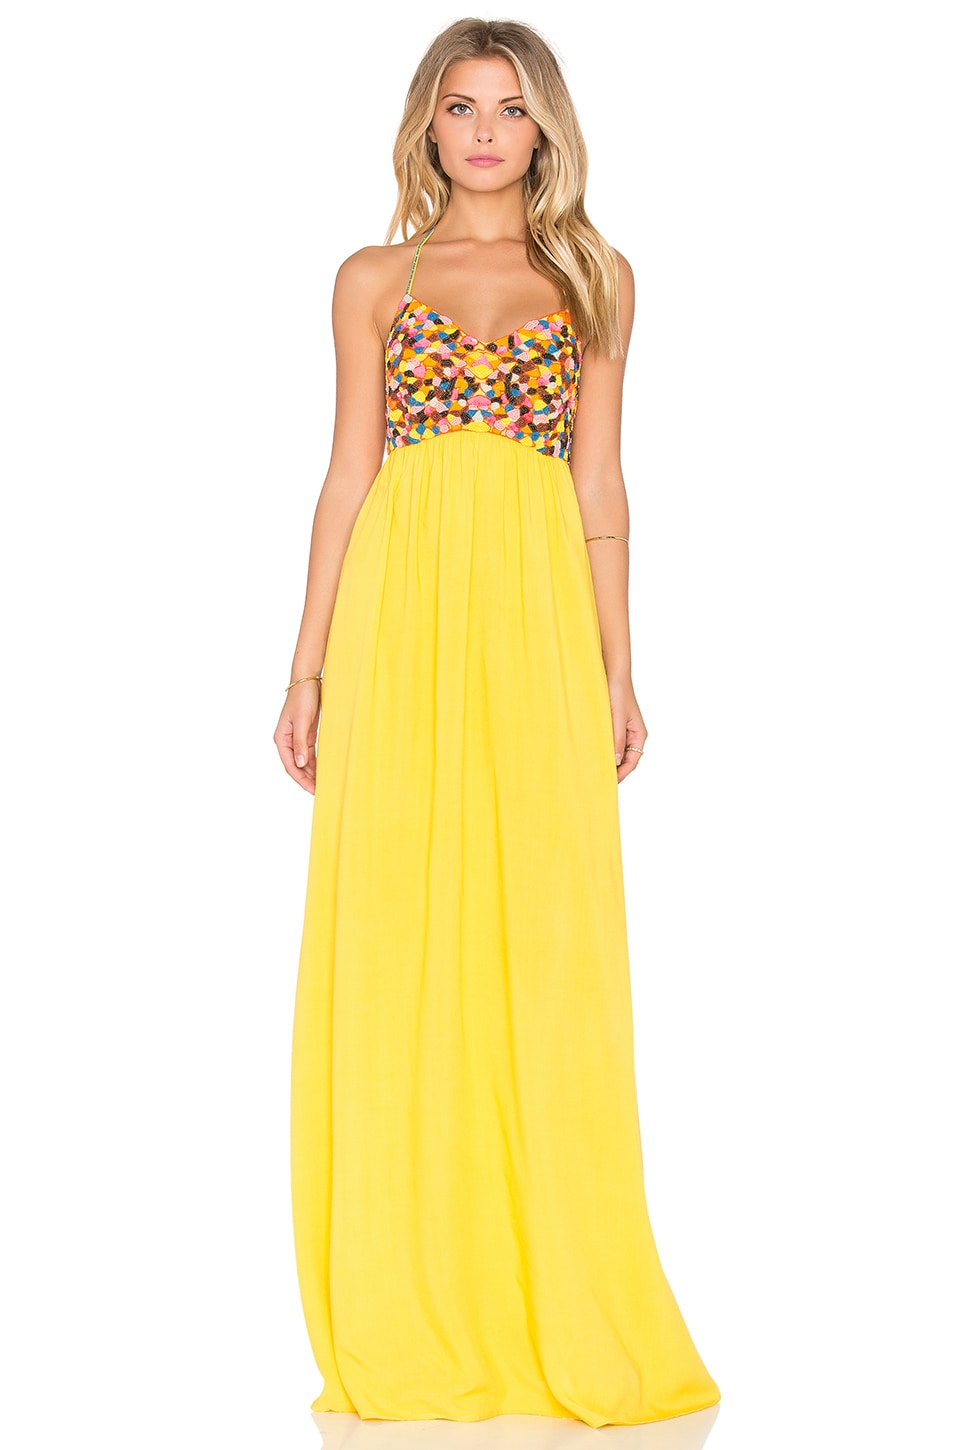 yellow embroidered maxi dress